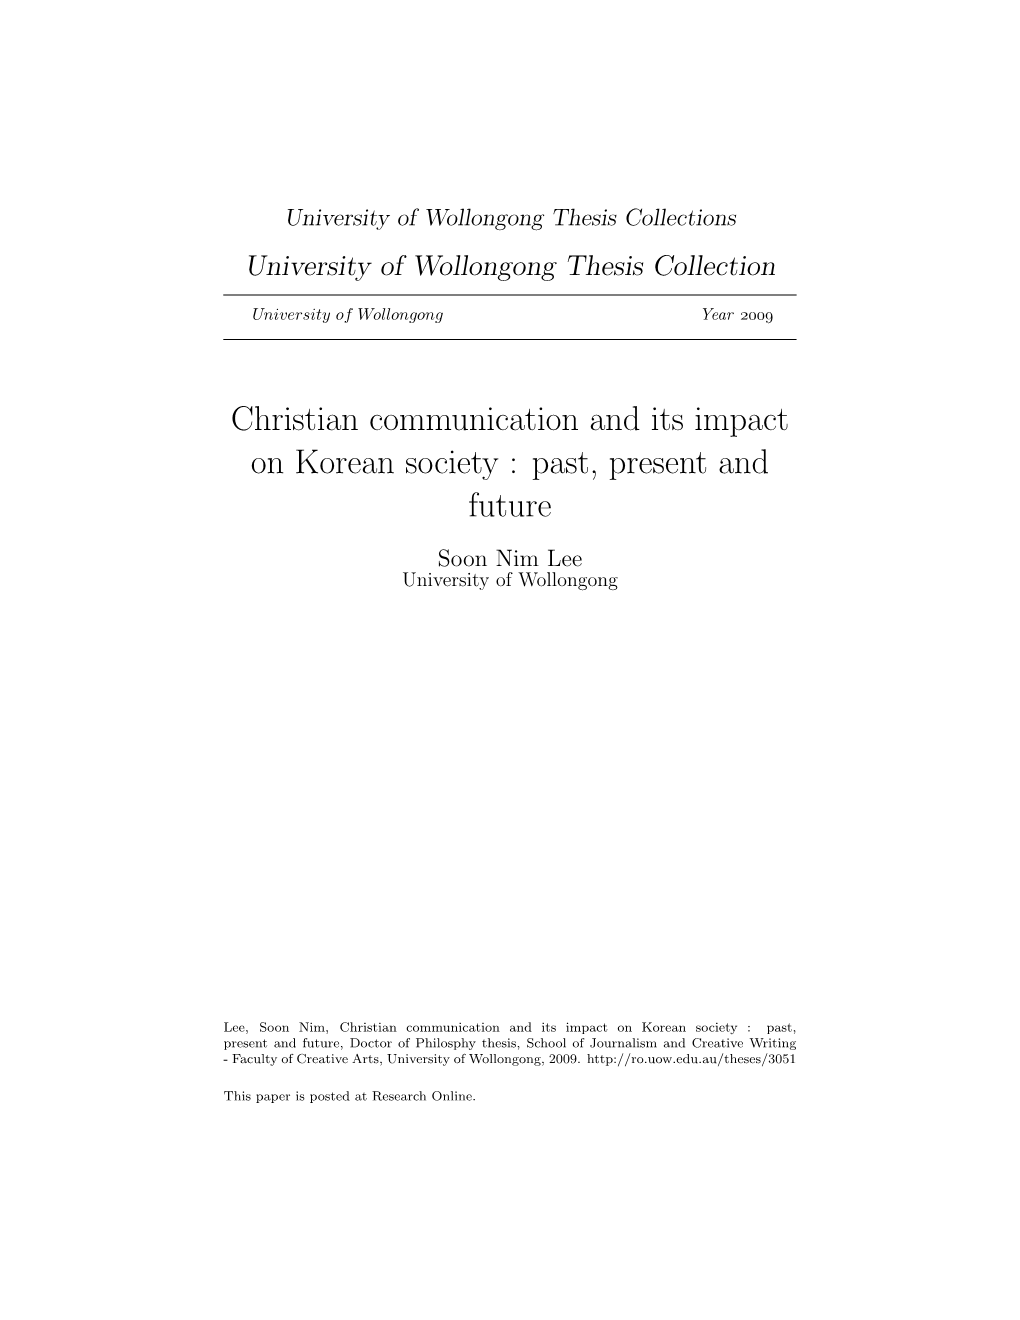 Christian Communication and Its Impact on Korean Society : Past, Present and Future Soon Nim Lee University of Wollongong